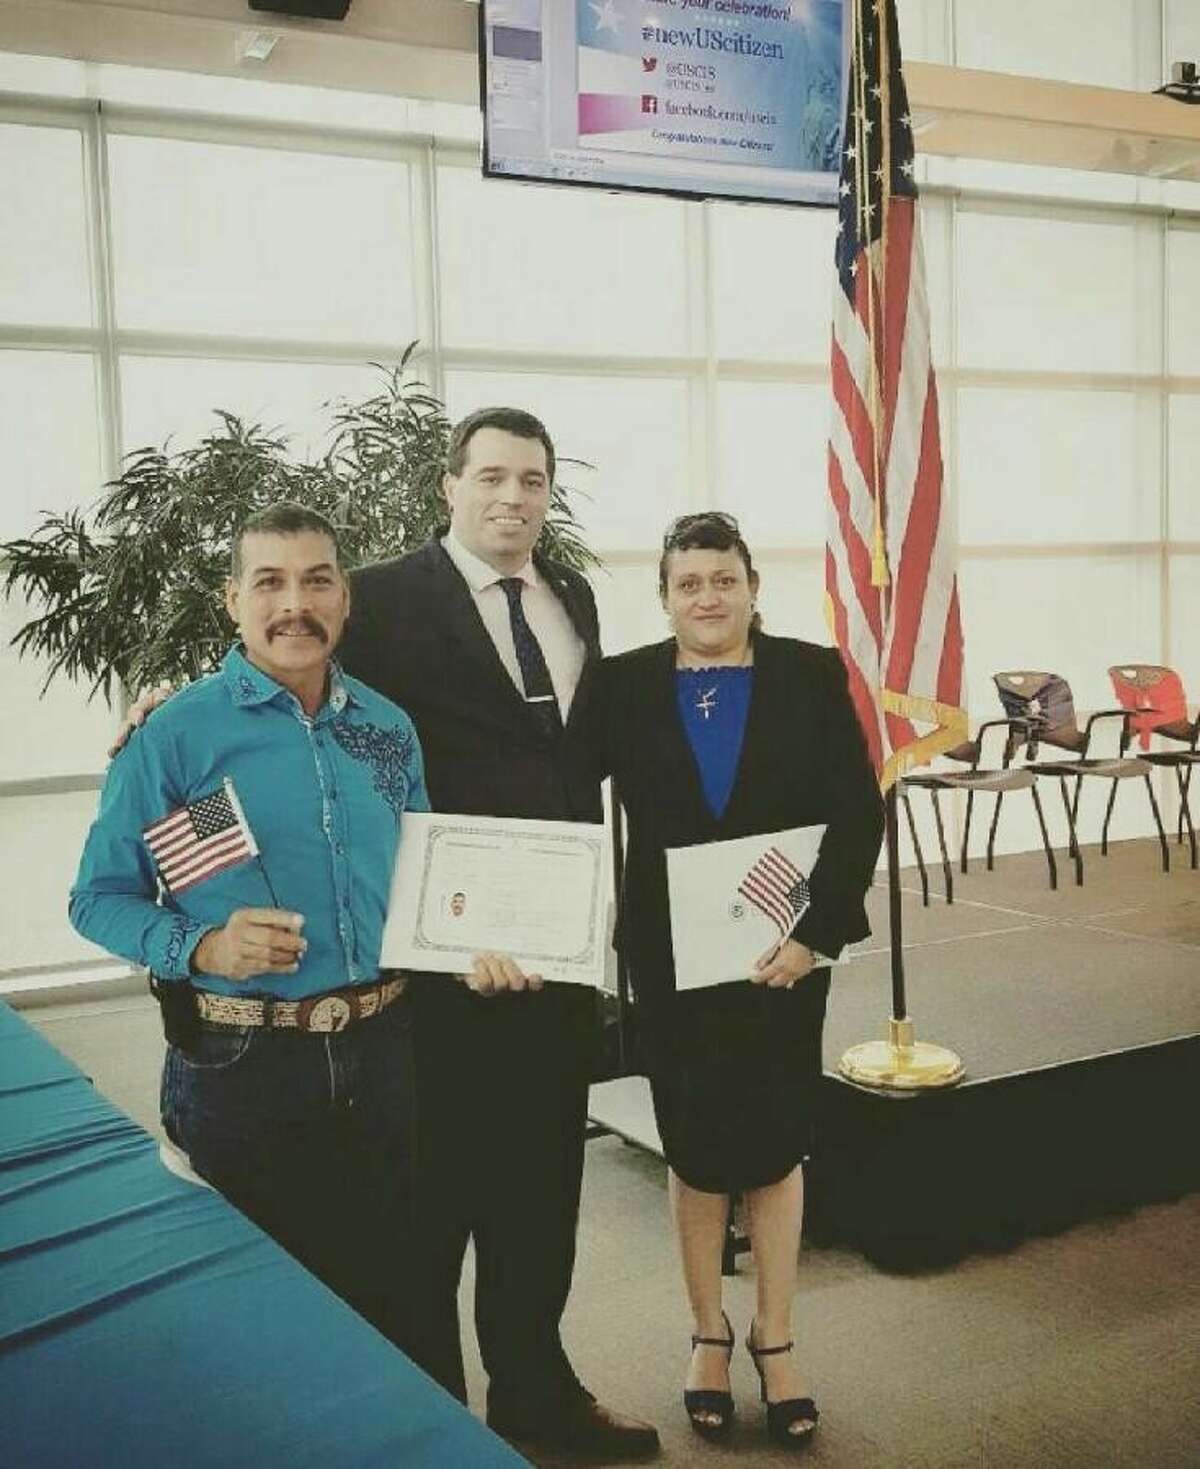 Plainview residents Luis (left) and Maria Martinez hold miniature American flags along with their U.S. citizenship papers after receiving them at a naturalization ceremony April 13 at the U.S. Citizenship and Immigration Services district office in Irving. They are shown with Supervisory Immigration Services Officer Raul Maus.